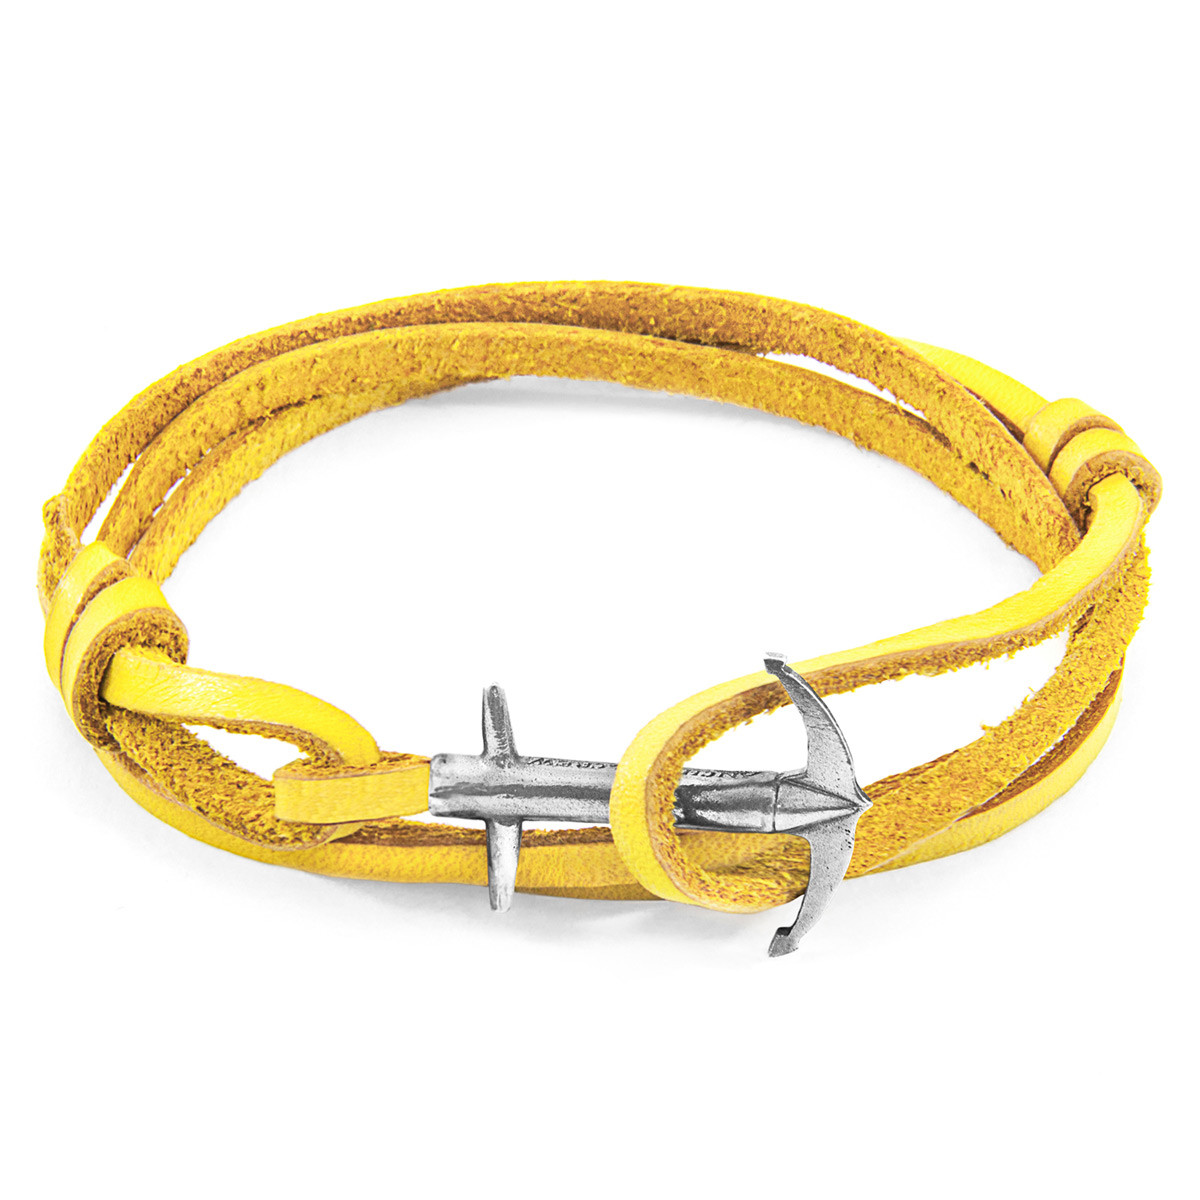 Anchor & Crew Mustard Yellow Admiral Anchor Silver and Flat Leather Bracelet